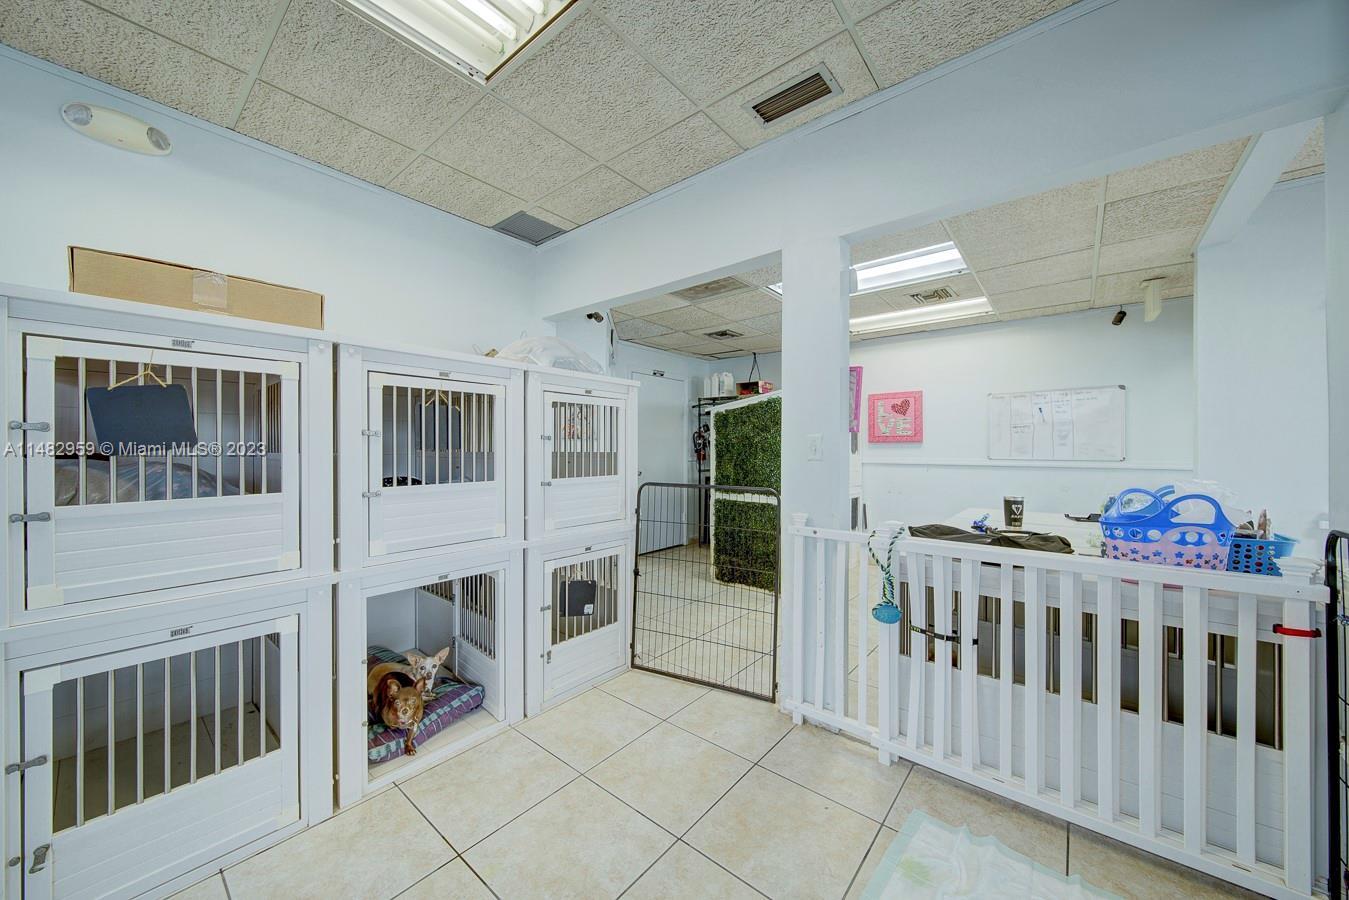 Photo of Dog Grooming Business For Sale In Miami! in Miami, FL